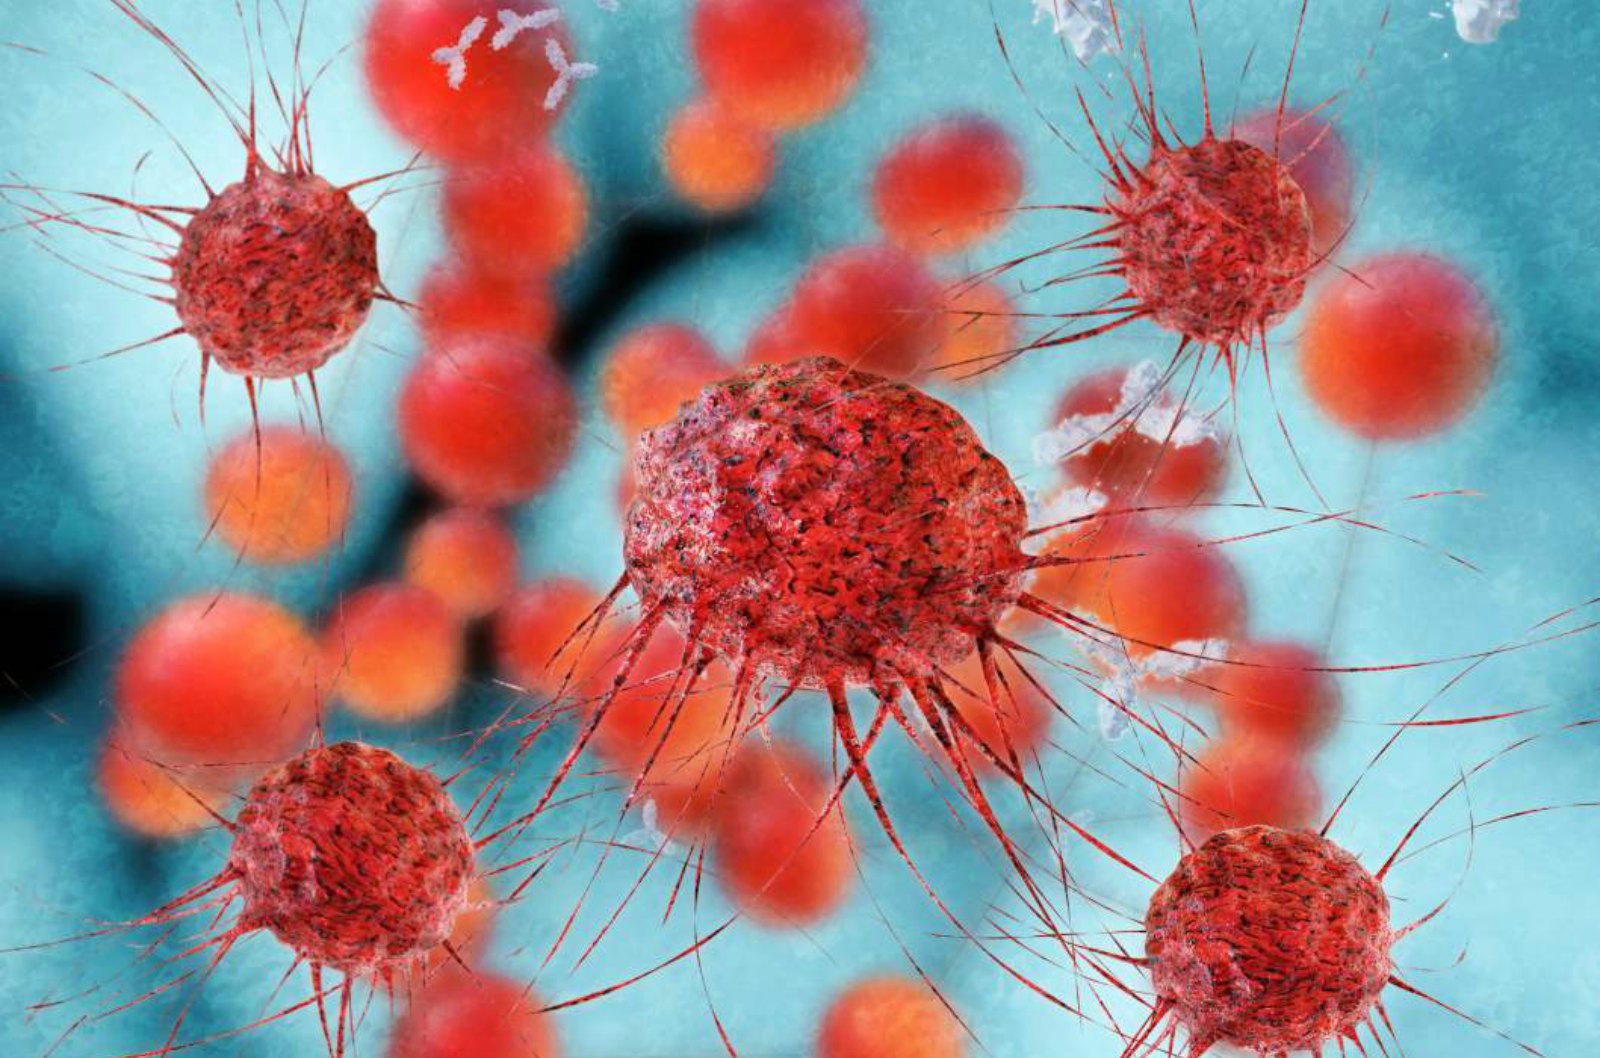 Drug Decreases Activity of Enzyme HDAC to Slow Cancer